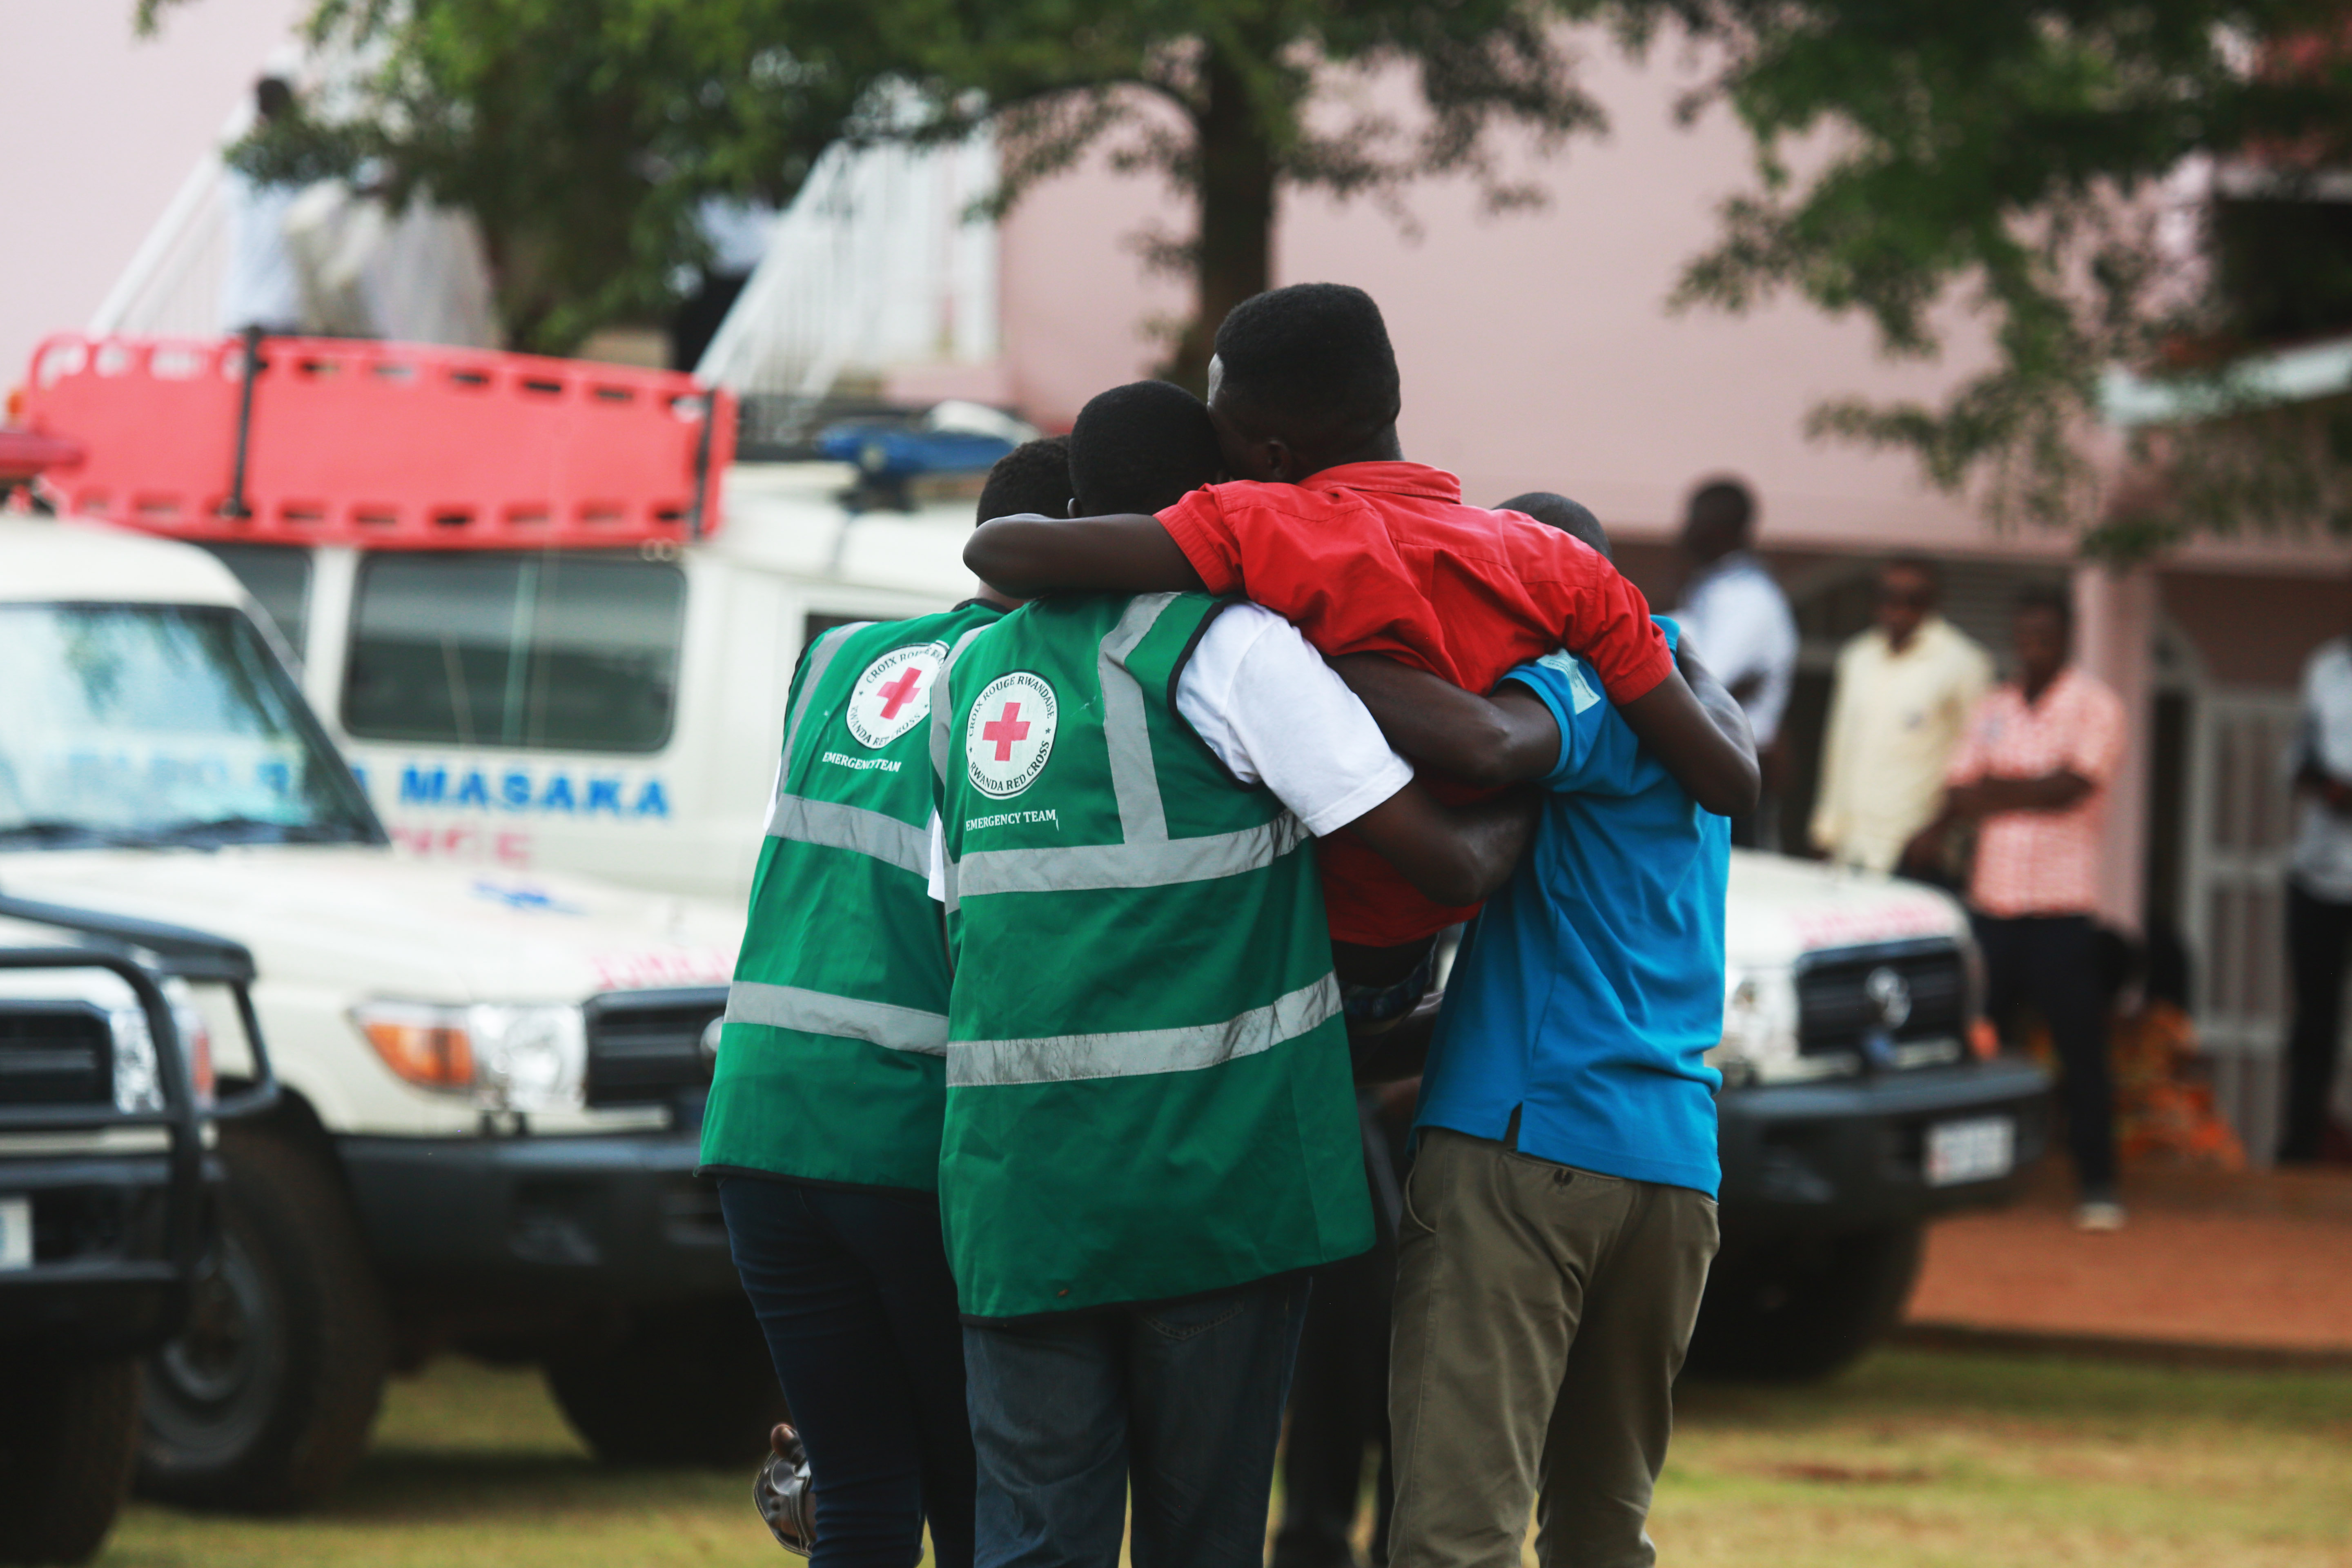 Volunteers help a trauma victim during a commemoration event at Kicukiro Nyanza Genocide Memorial on May 4, 2019. Youth gathered in Kigali to discuss and reflect on inter-generational trauma as a result of the 1994 Genocide against the Tutsi. . Photo by Sam Ngendahimana